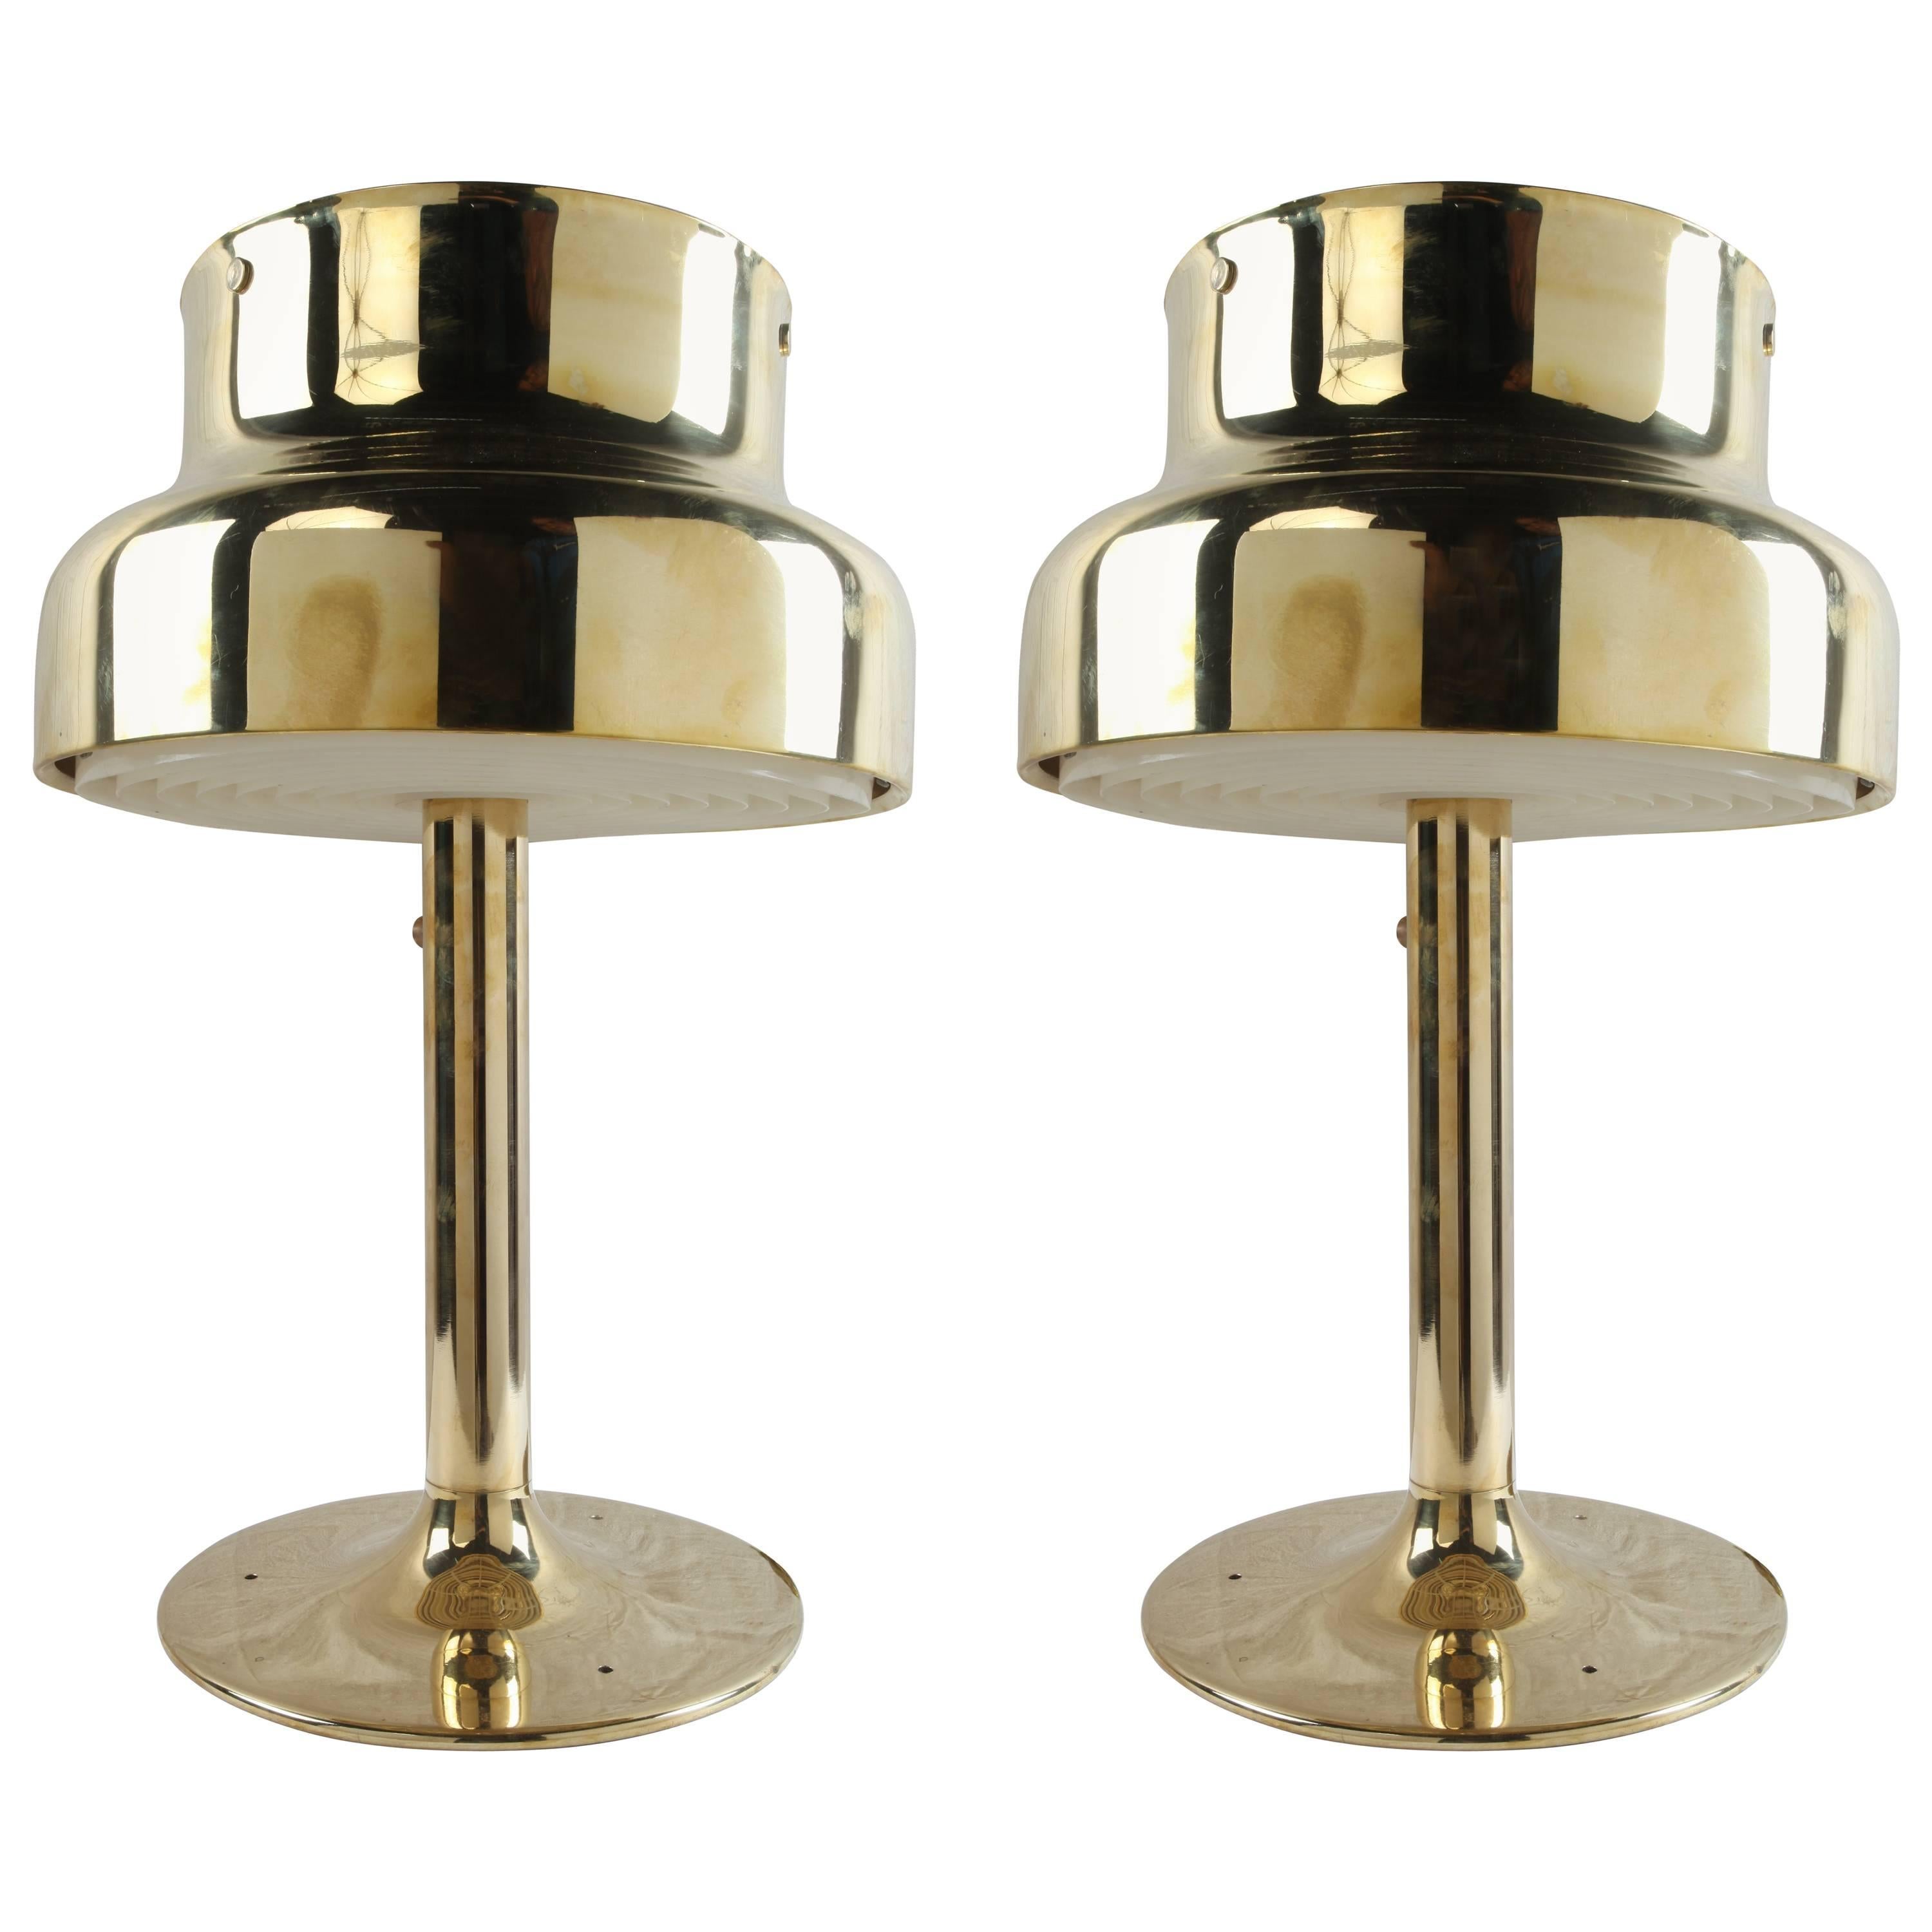 Pair of Brass Ship's Stateroom Table Lamps, 1970s